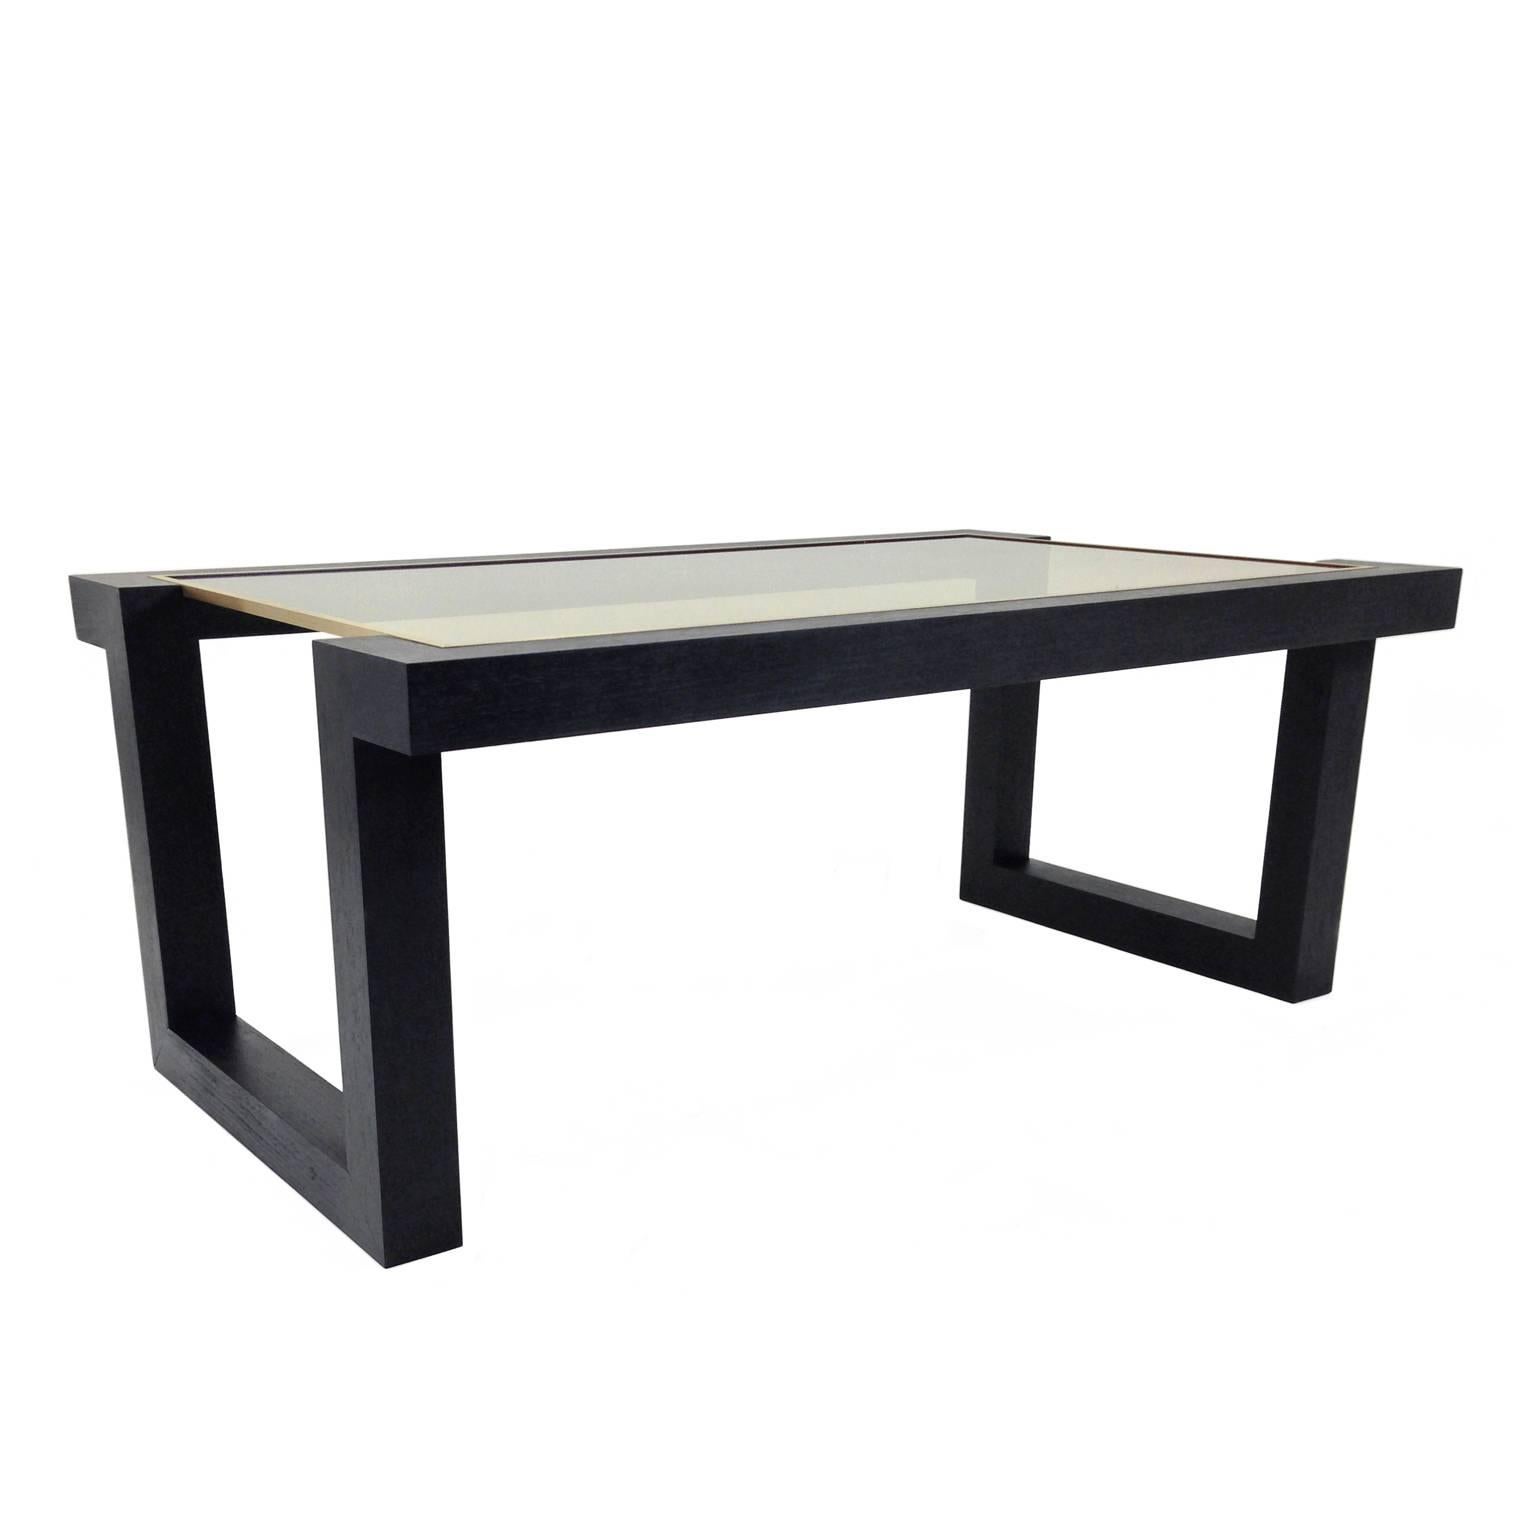 FLAIR Home collection custom black ash veneer on solid ash wood cut-out leg coffee table with brass inlay and bronze glass.

The FLAIR Metropolis collection is custom-made in New York. Each piece is handmade by a master woodworker using the finest